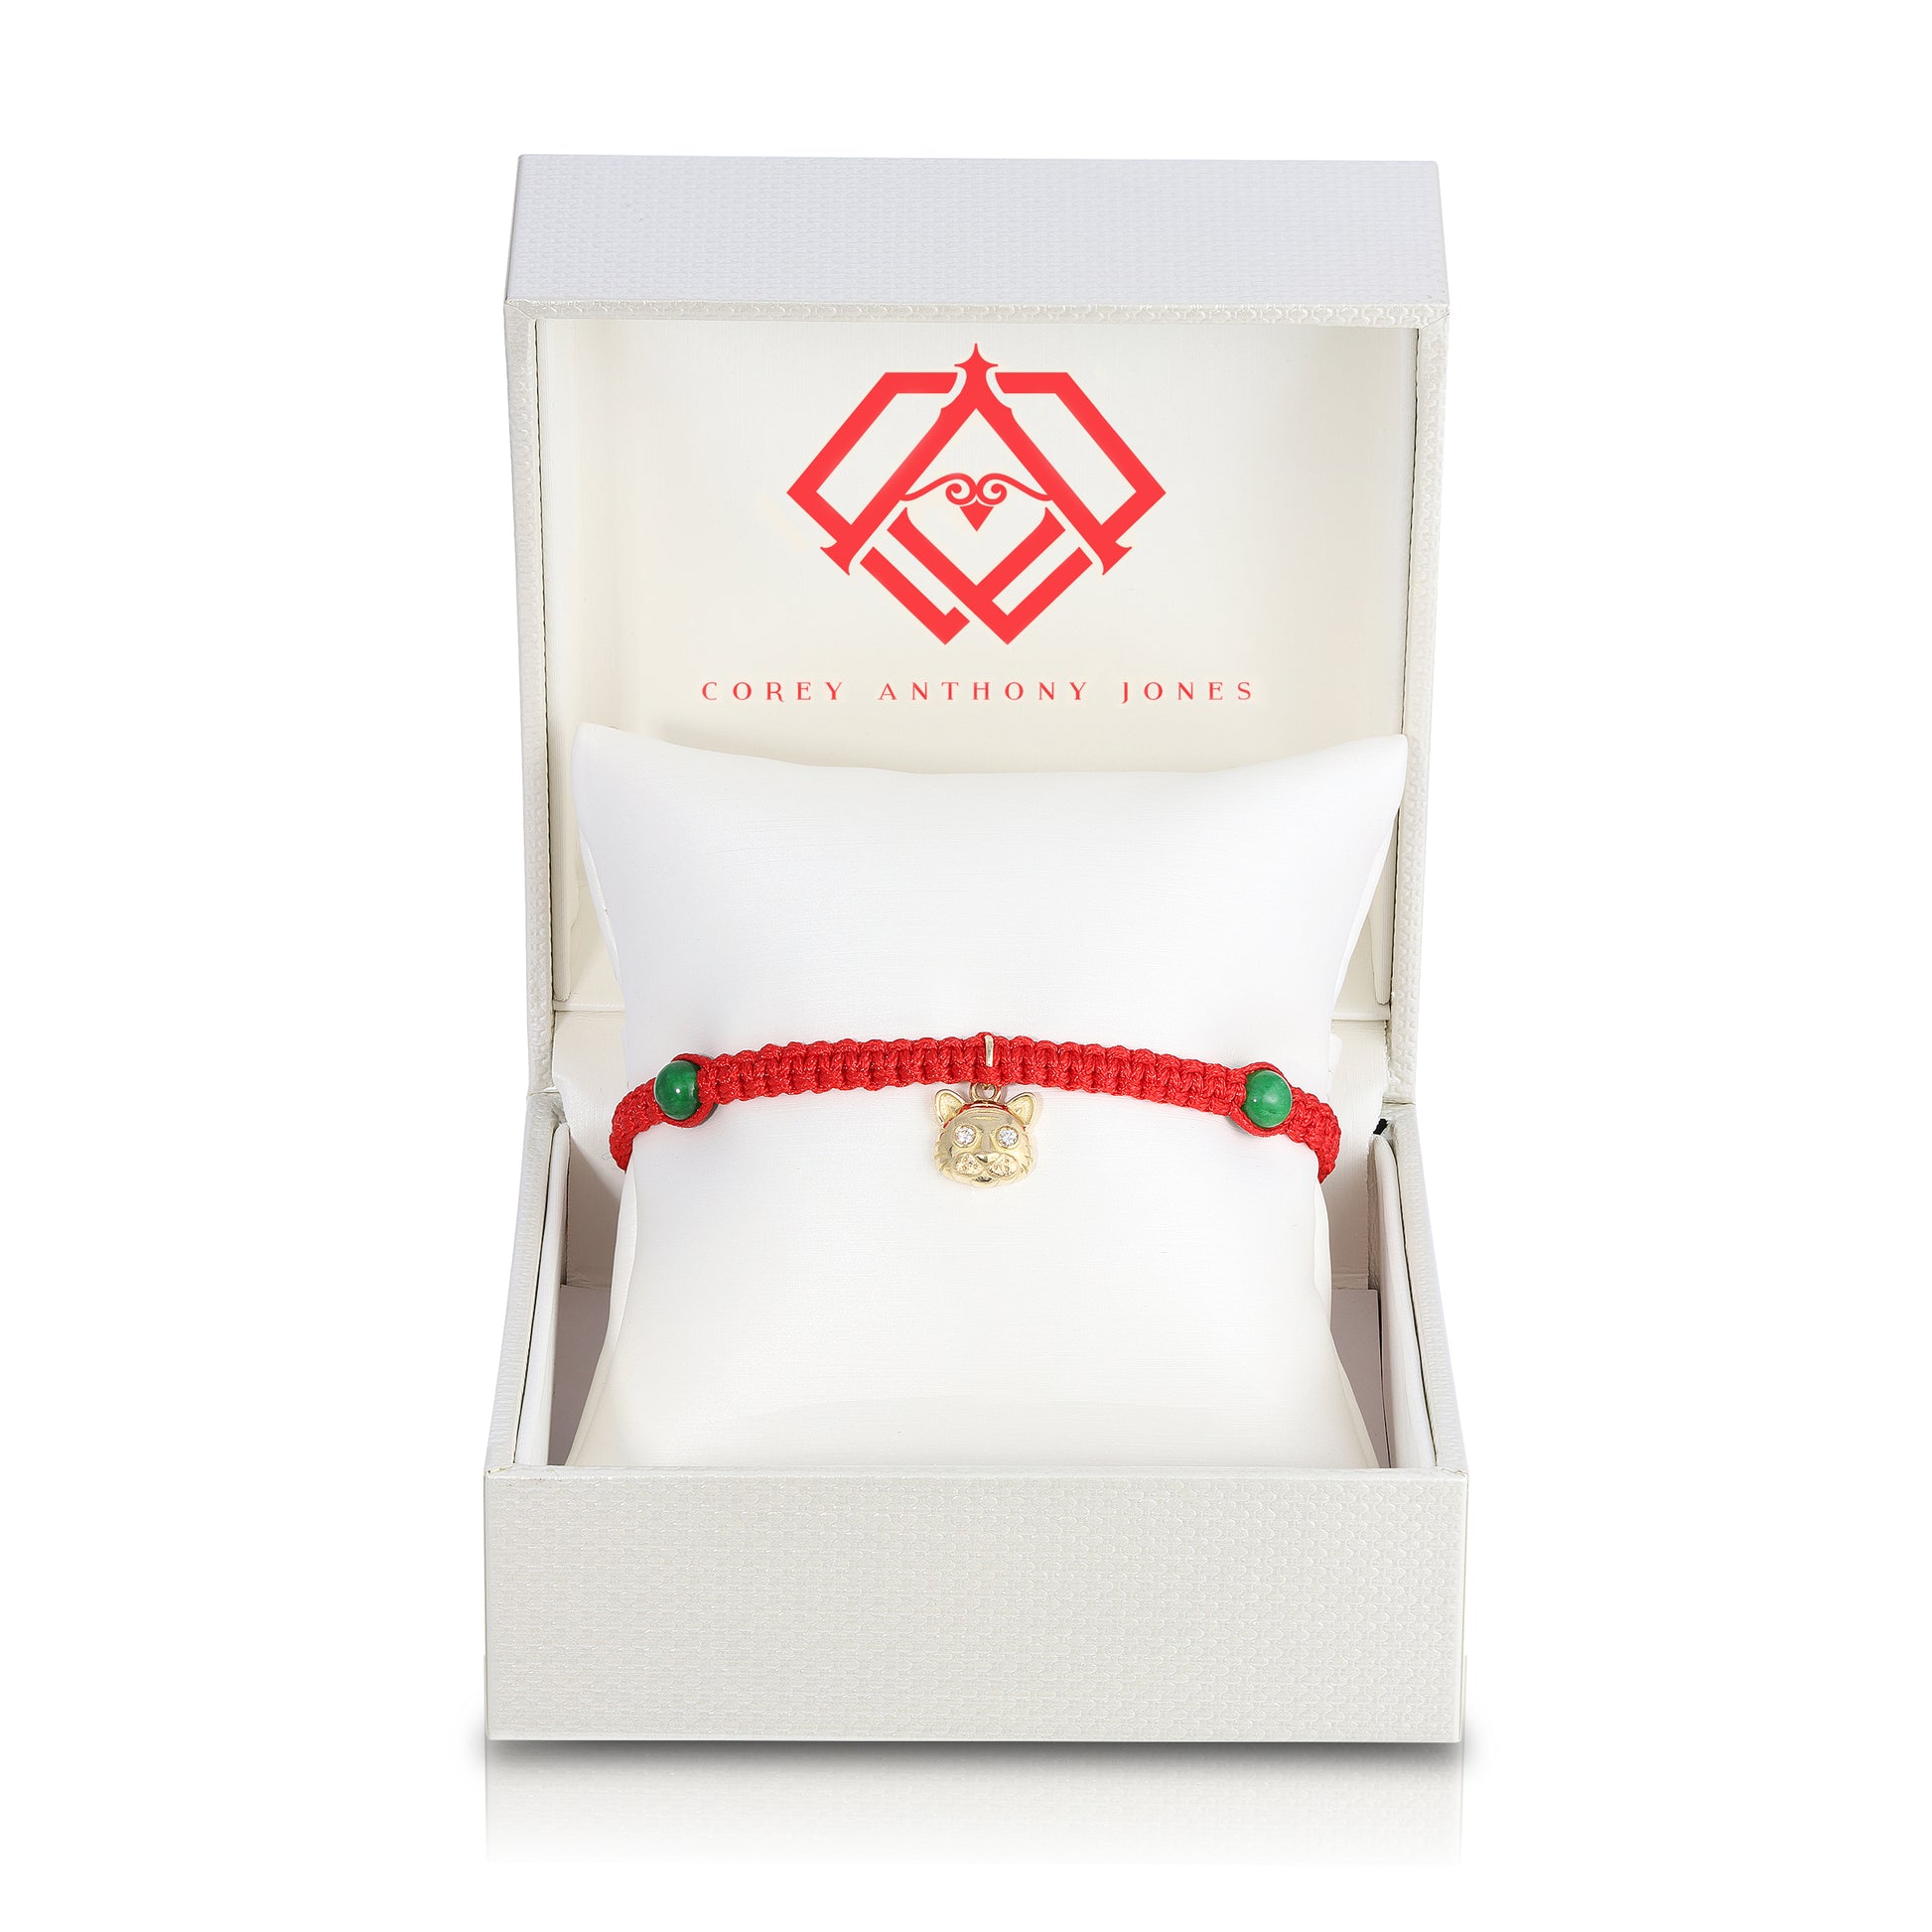 Bracelet with Tiger Charm in Box